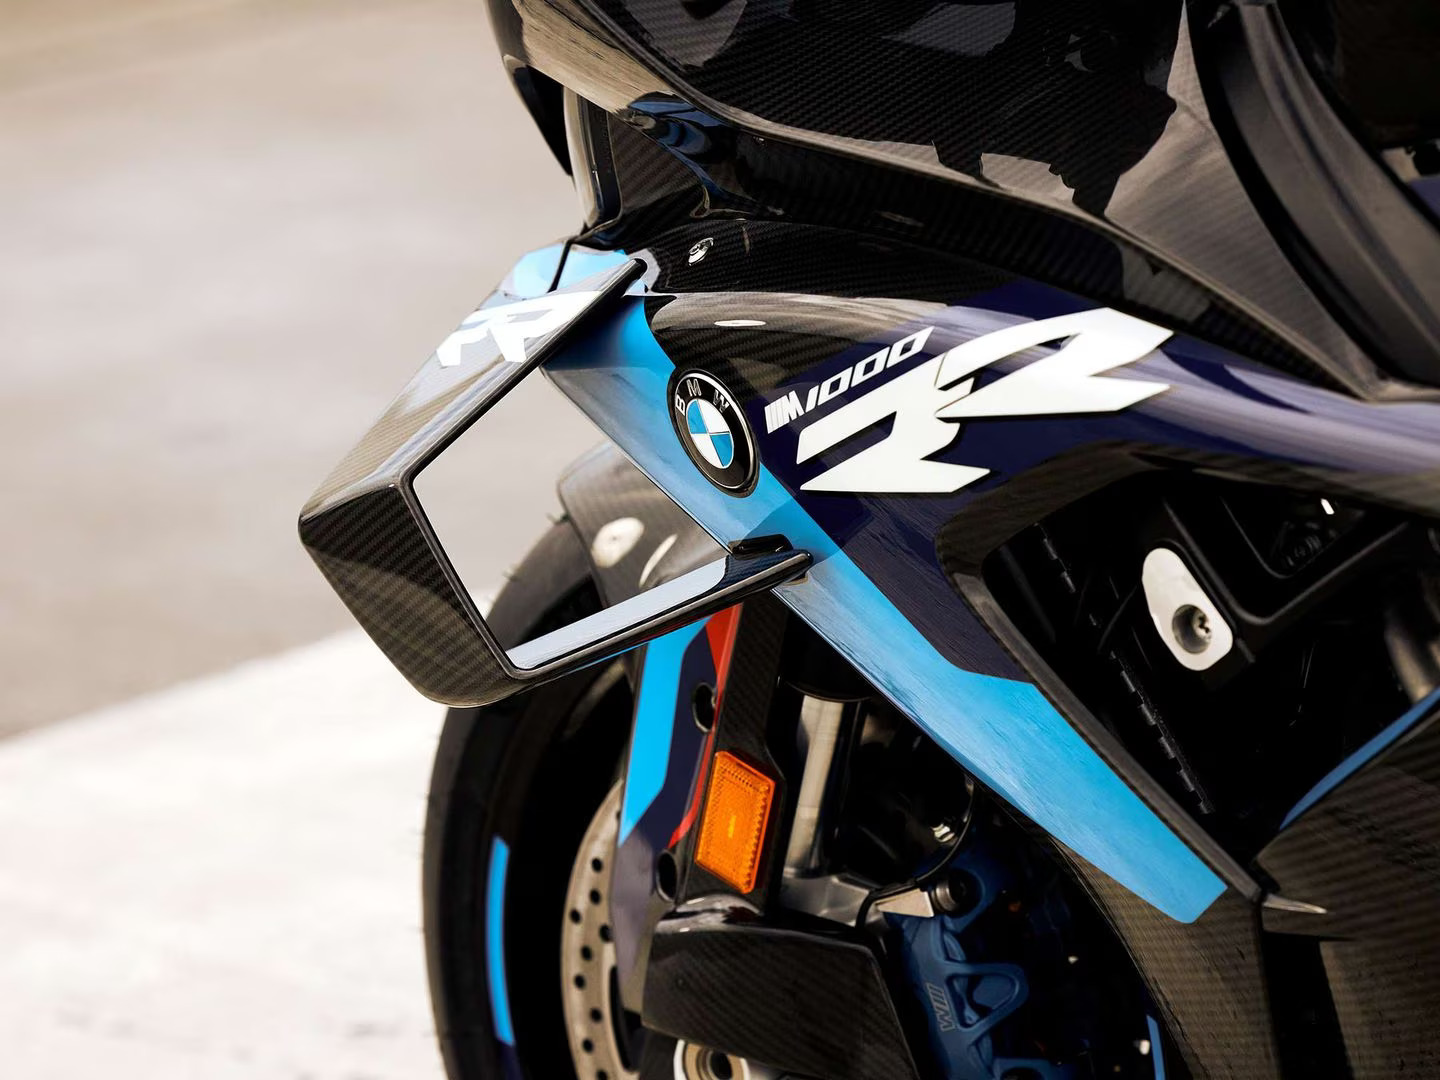 BMW's Most Expensive Superbike Launched in India at Rs 49 lakh - view